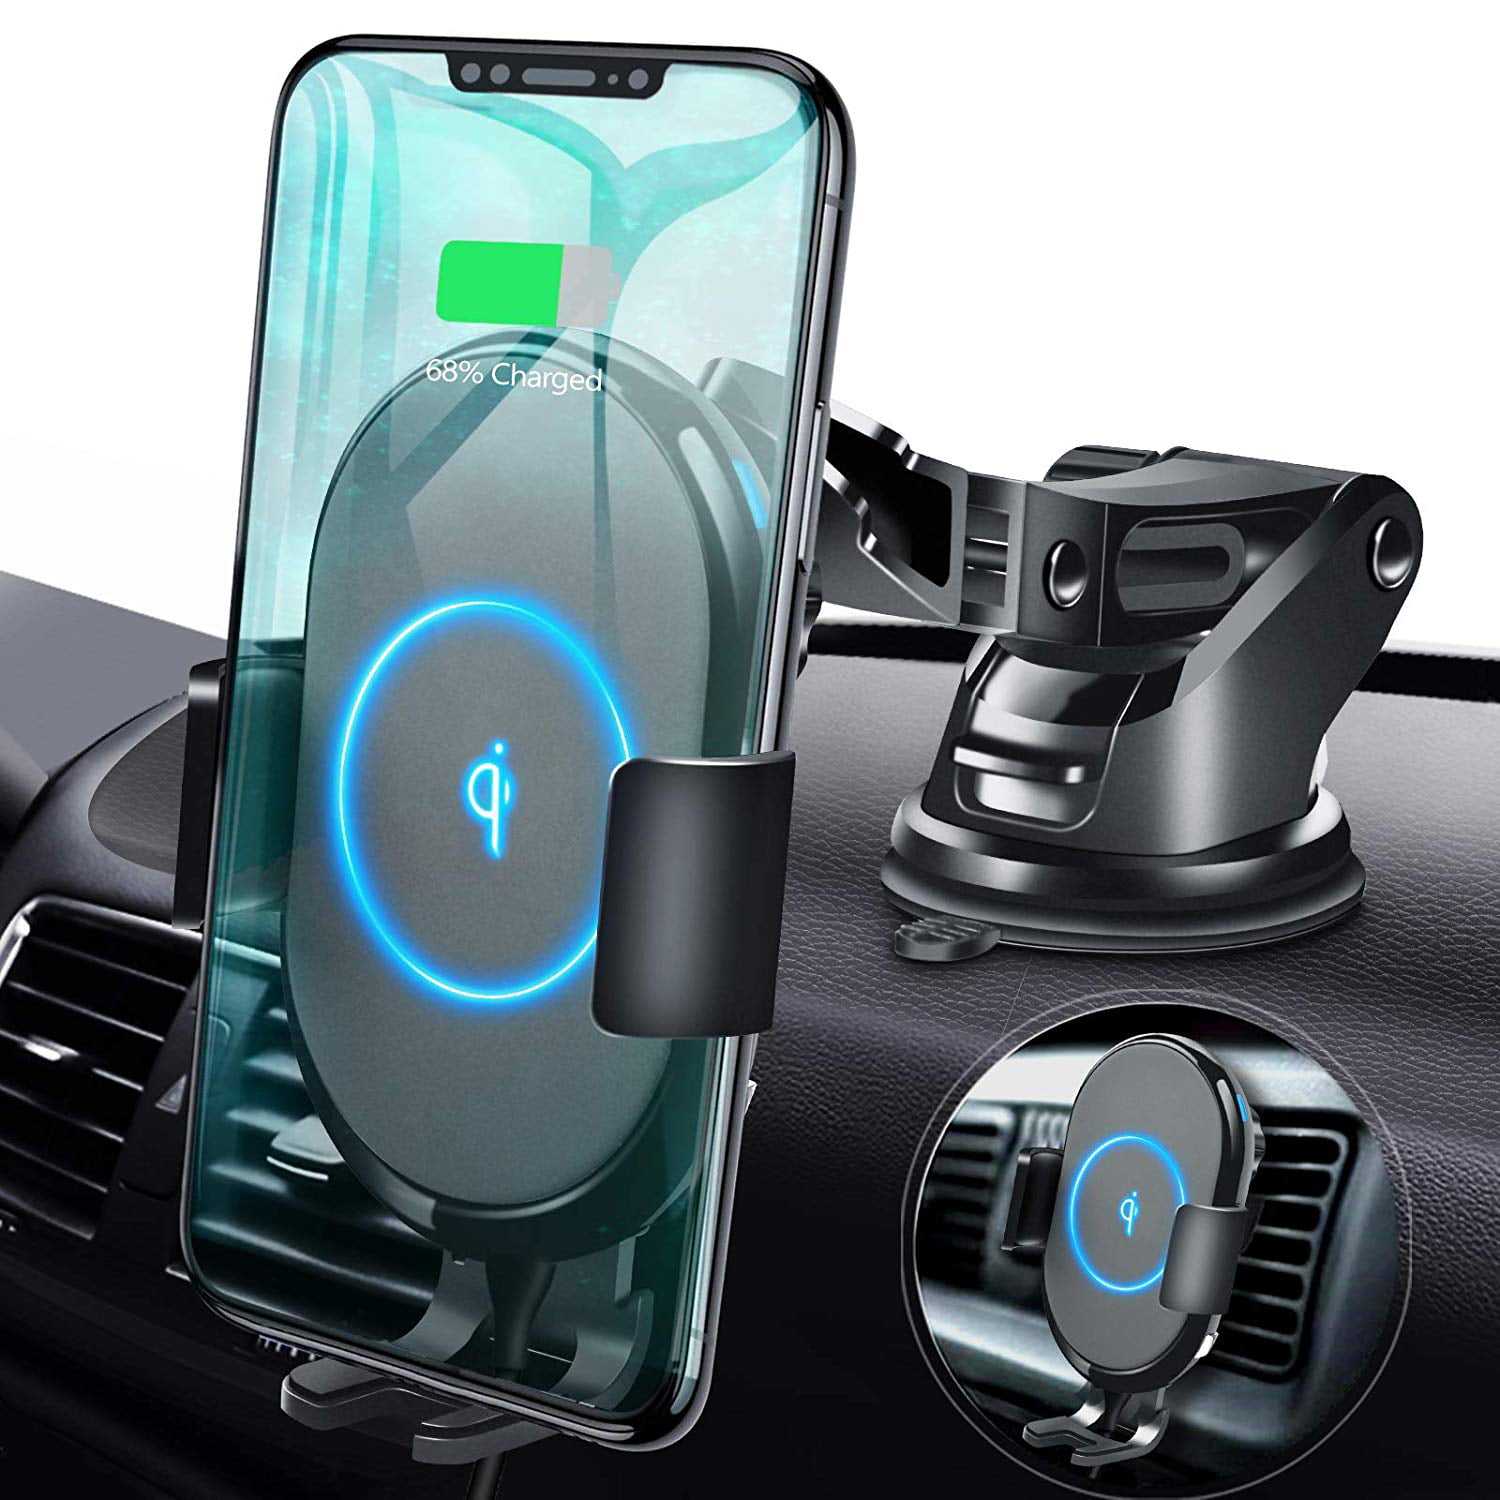 Dashboard & Windshield Car Mount Cell Phone Holder 7.5W Compatible for iPhone Xs Max/Xs/XR/X 7.5W & 10W Wireless Car Charger 10W Compatible for Samsung Galaxy S10/S10+/S10e/S9/S9+/Note9 2020 NEW 